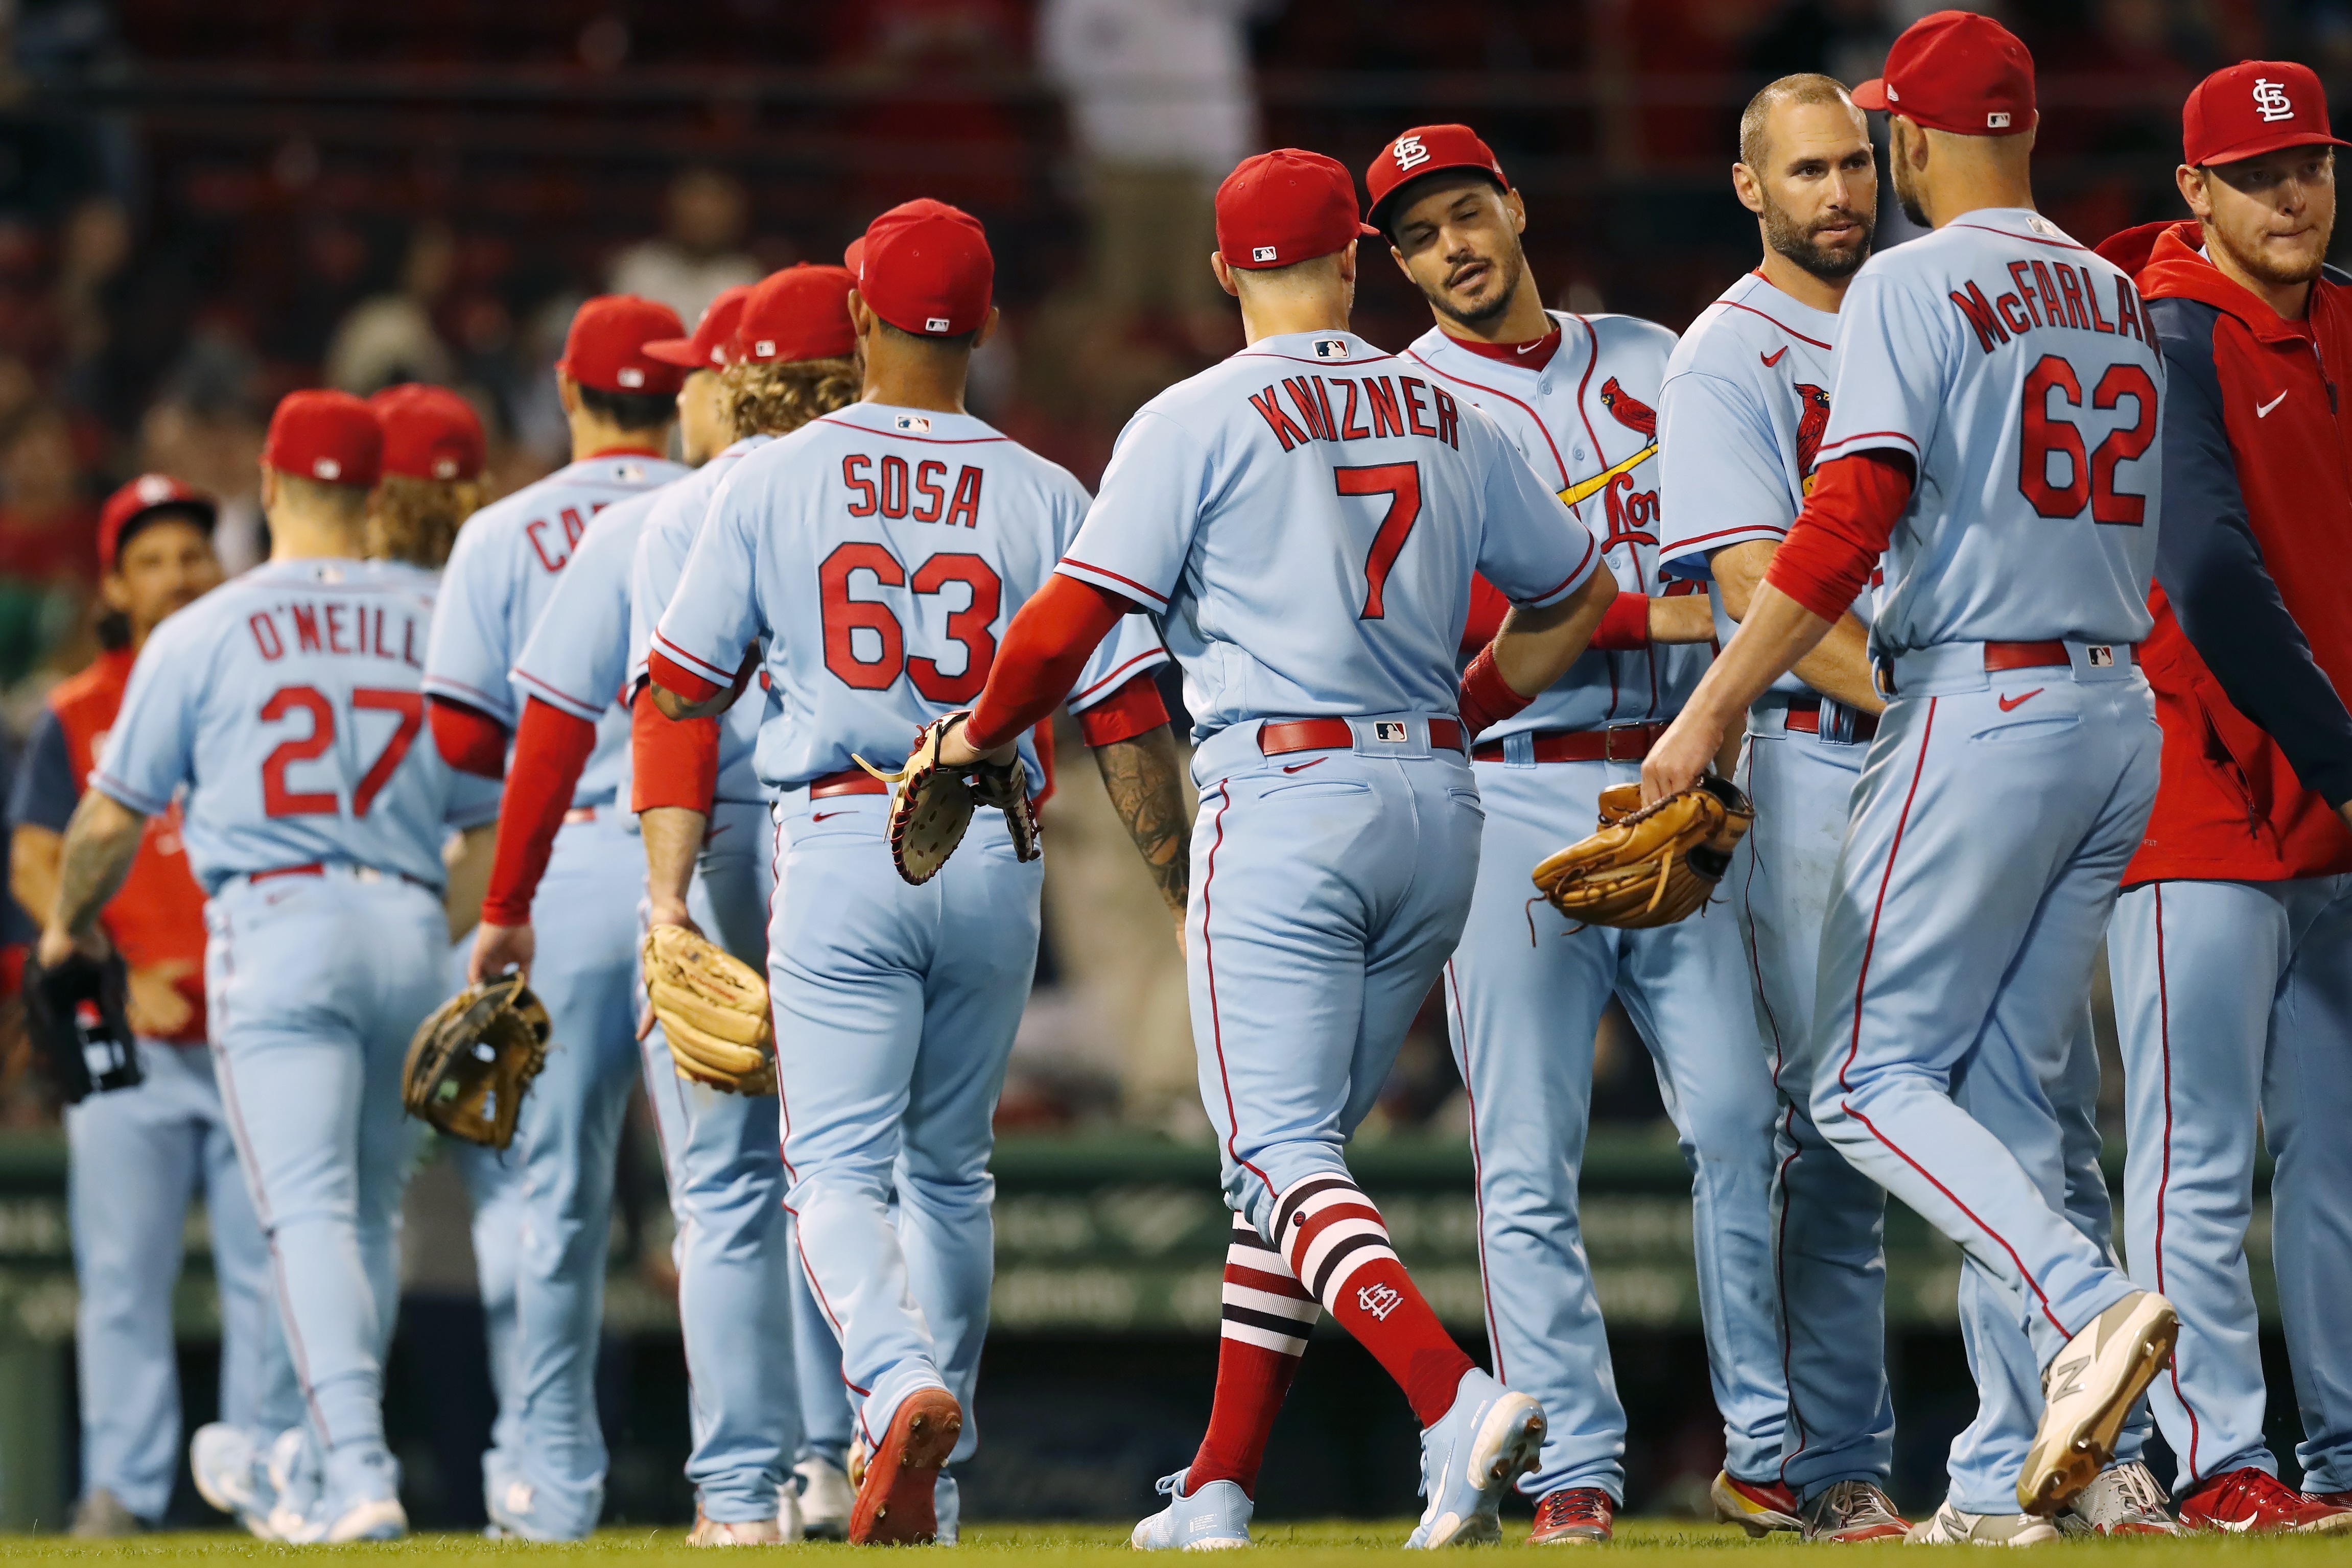 Watch St. Louis Cardinals vs Chicago Cubs for free in the US: 2023